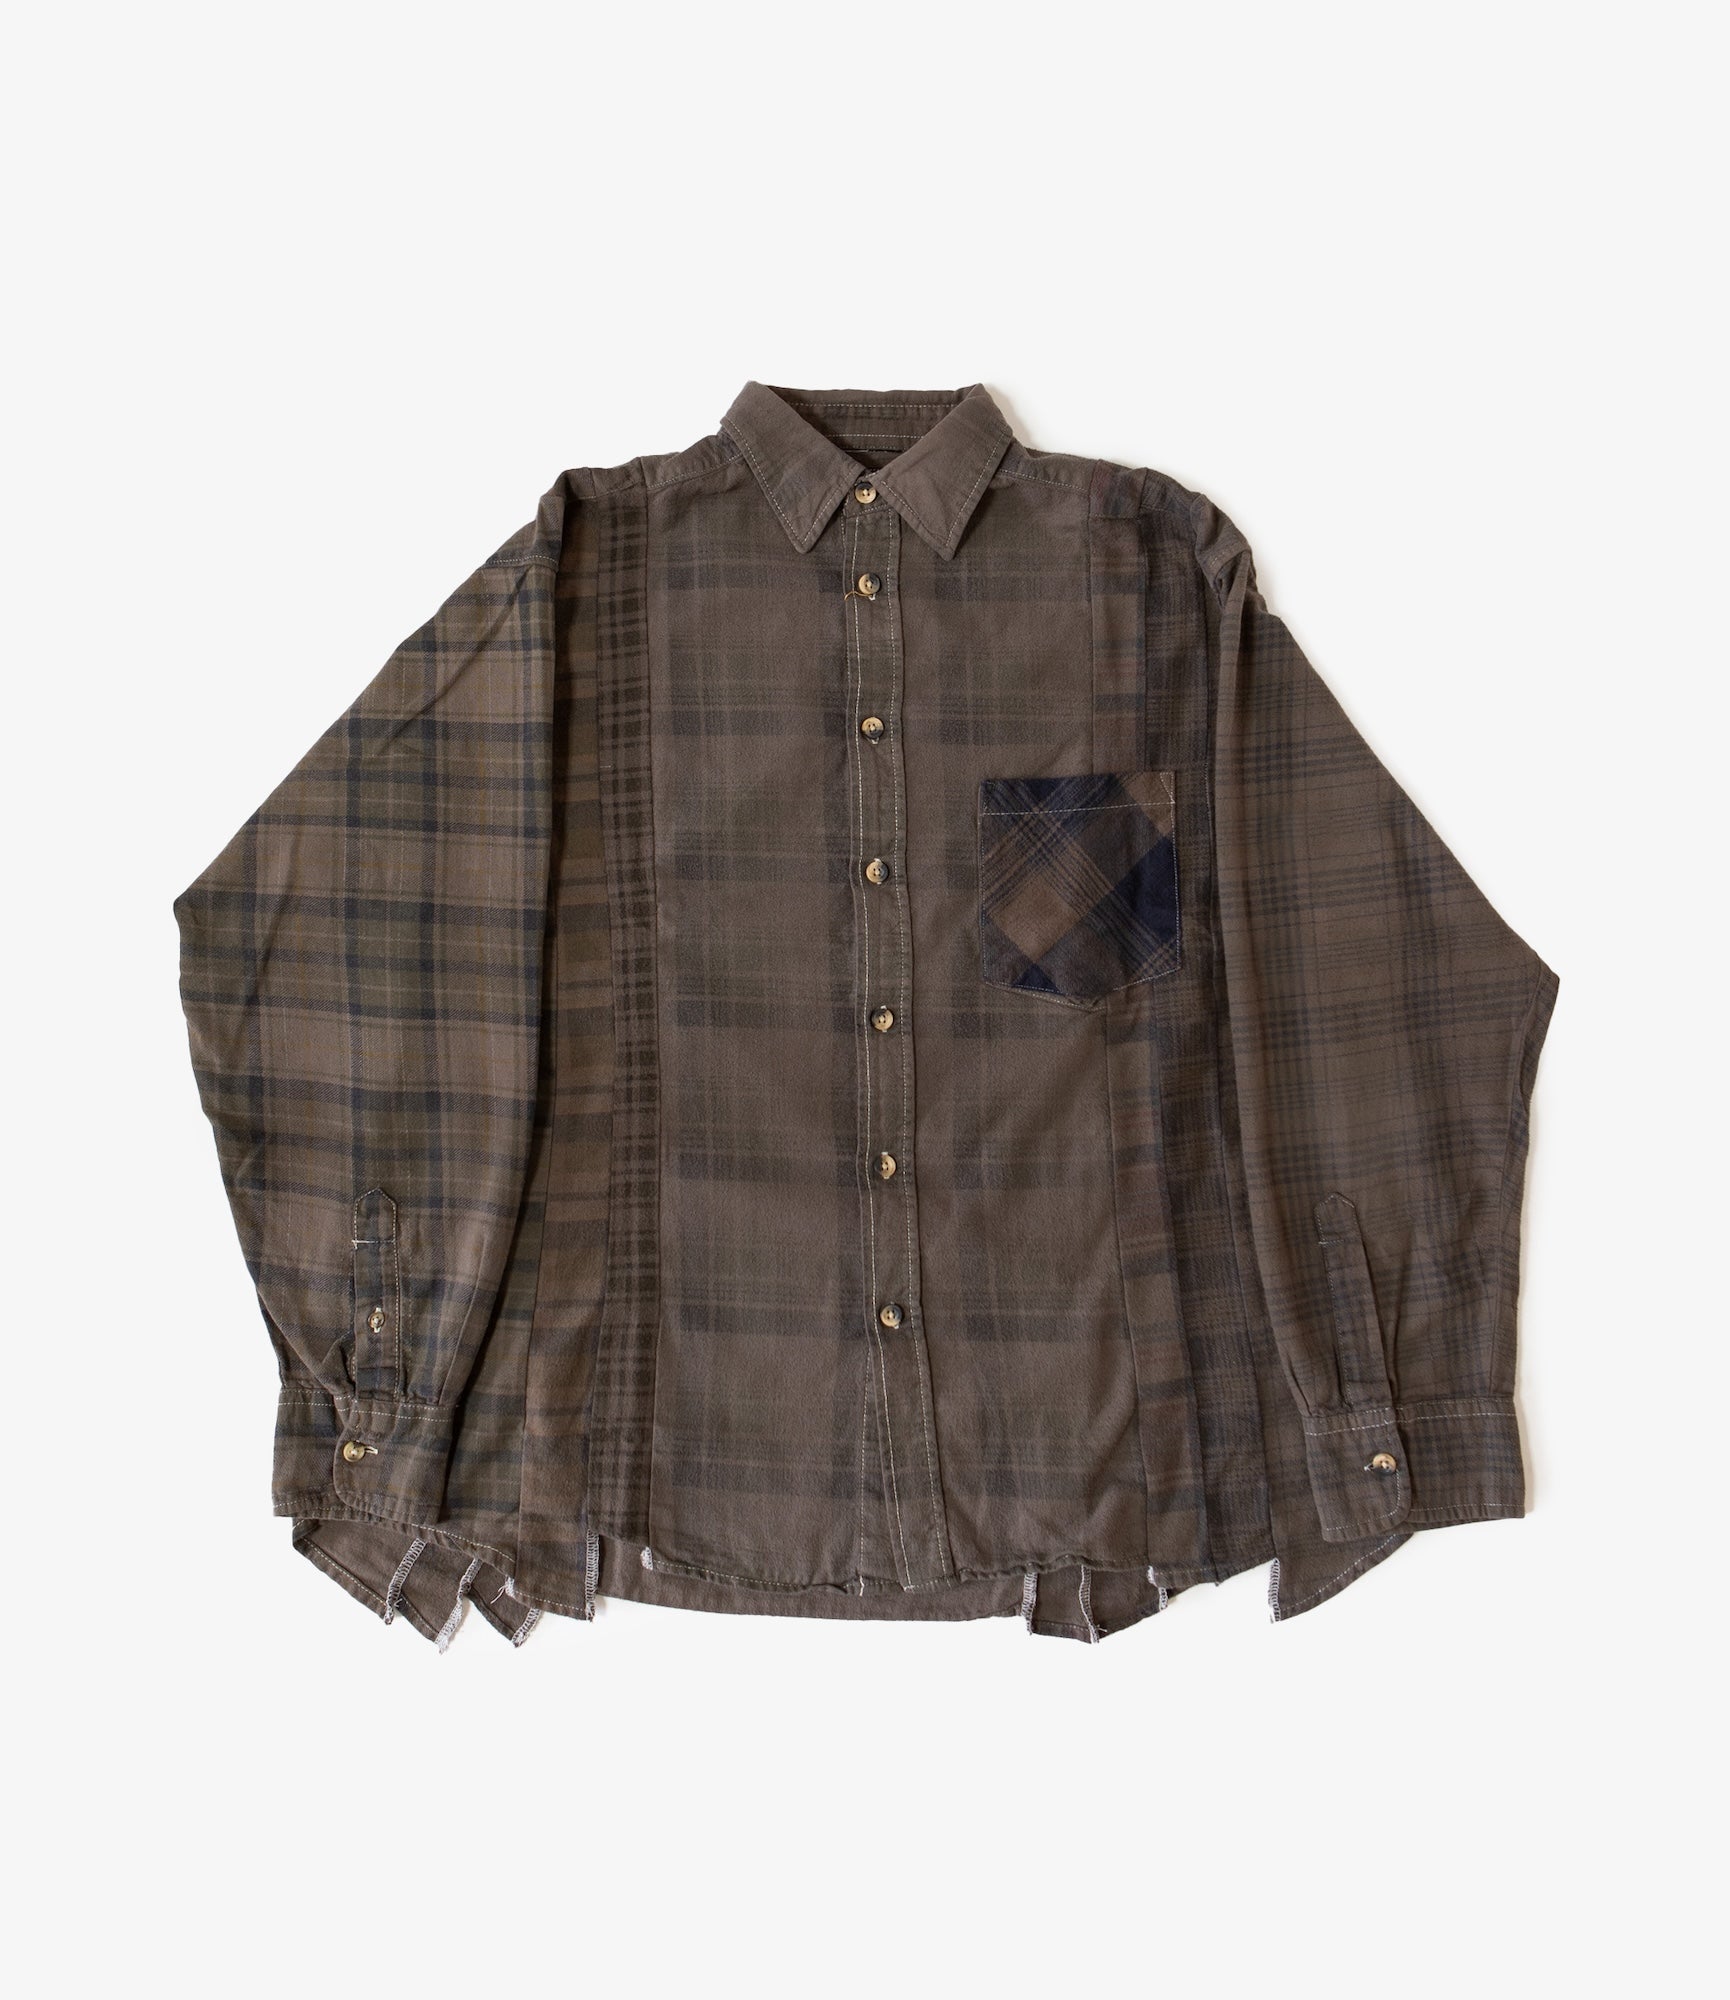 Rebuild by Needles Flannel Shirt - 7 Cuts Shirt / Over Dye - Brown